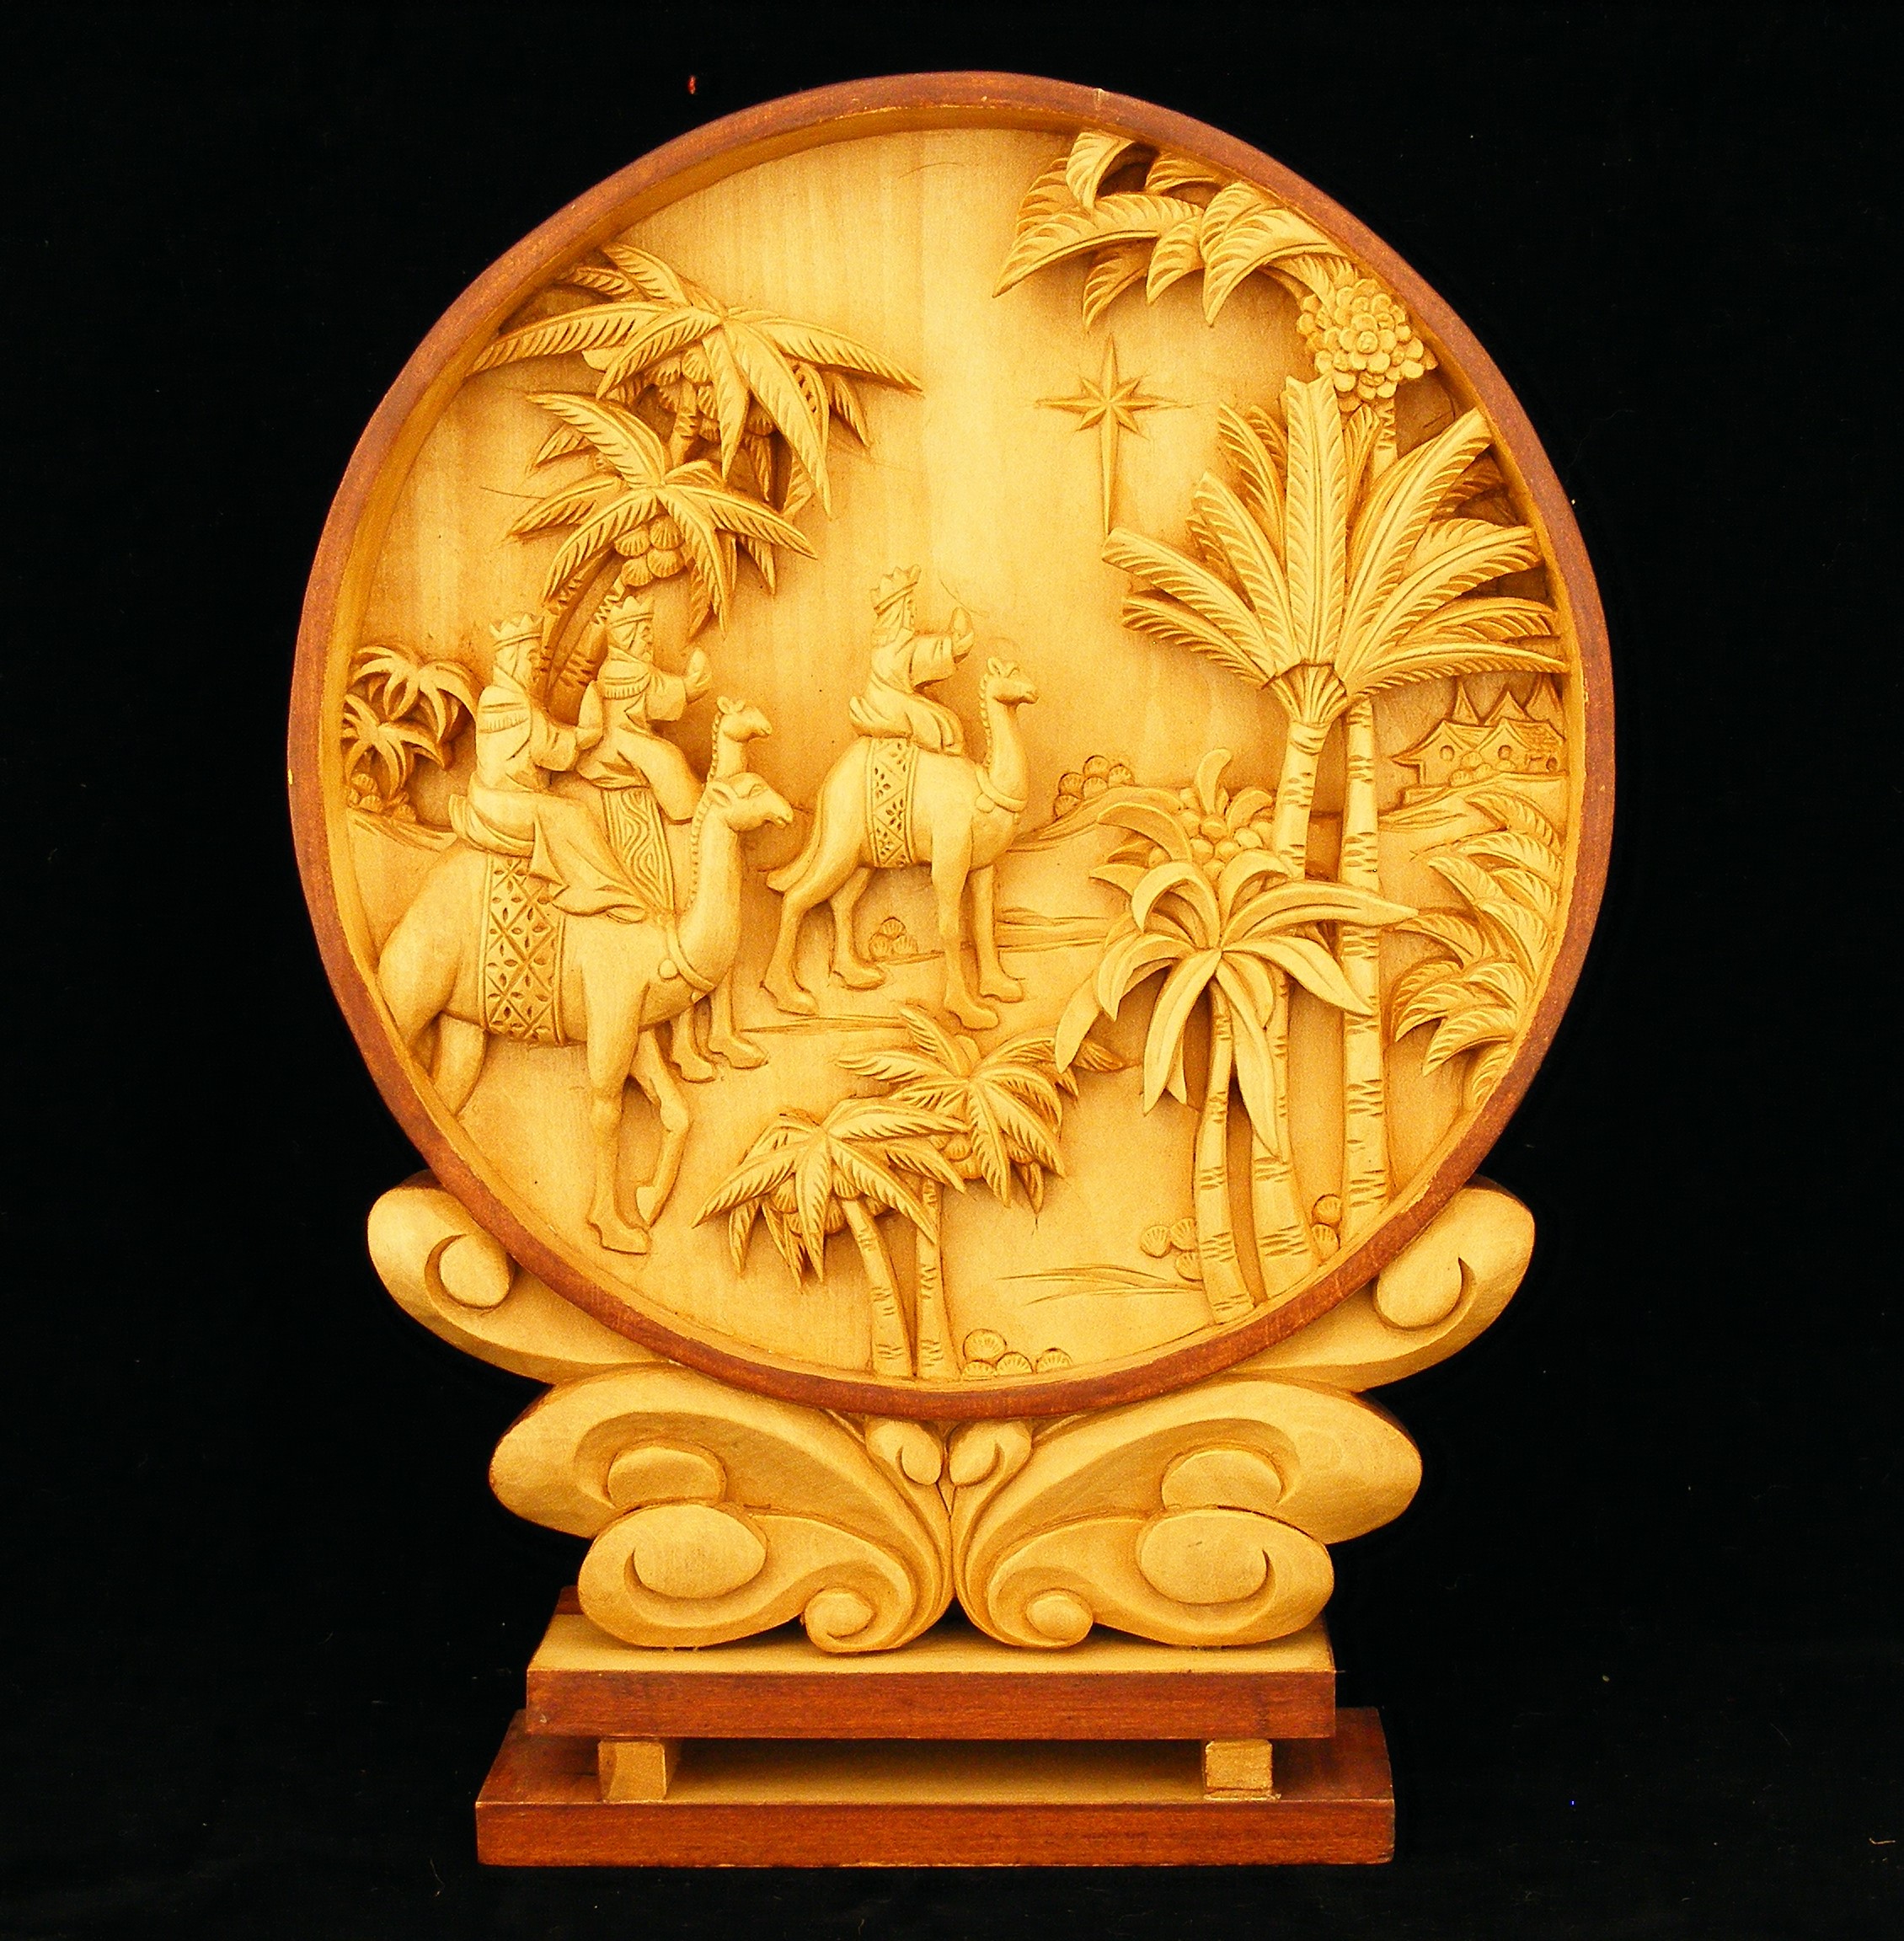 Journey of the Magi woodcarving from Zhejiang, China. Part of the Marian Library Art and Artifacts Collection.